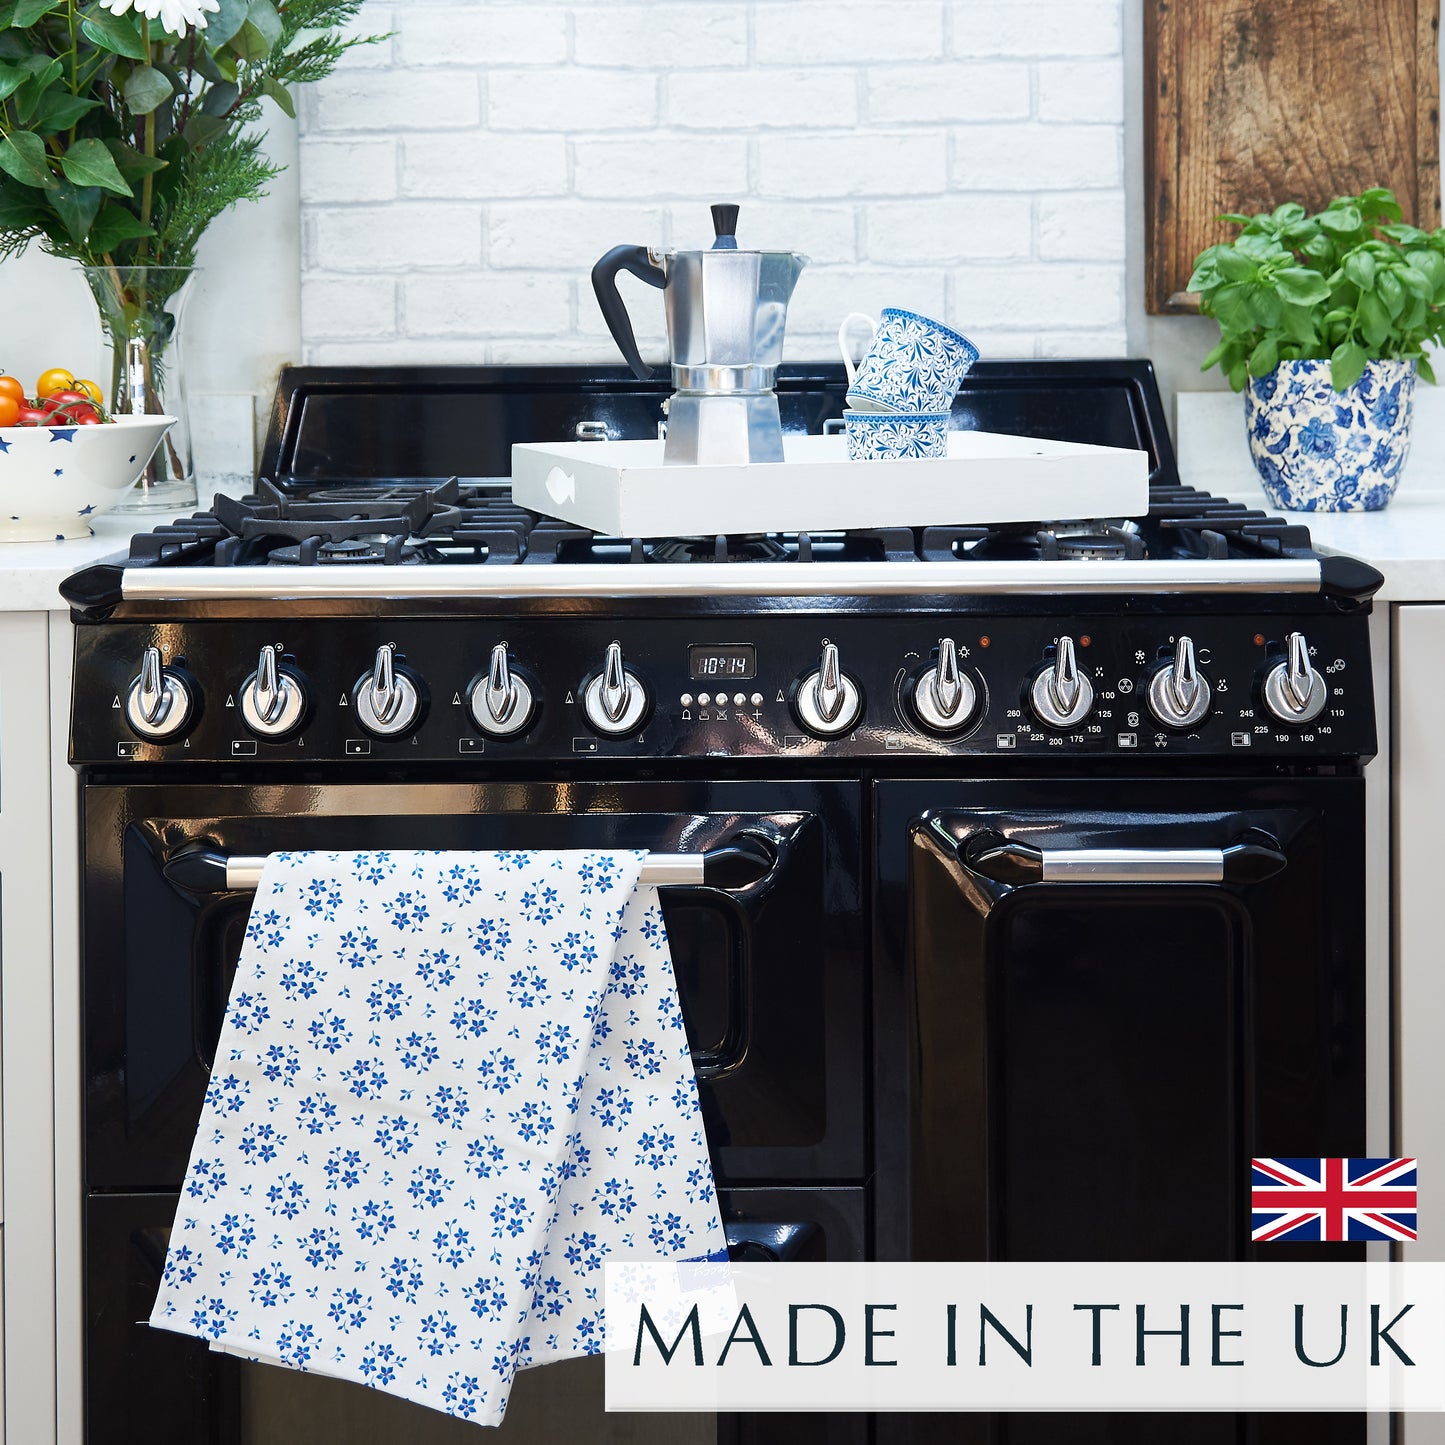 Blue Ditsy Floral Tea Towel, made in the UK